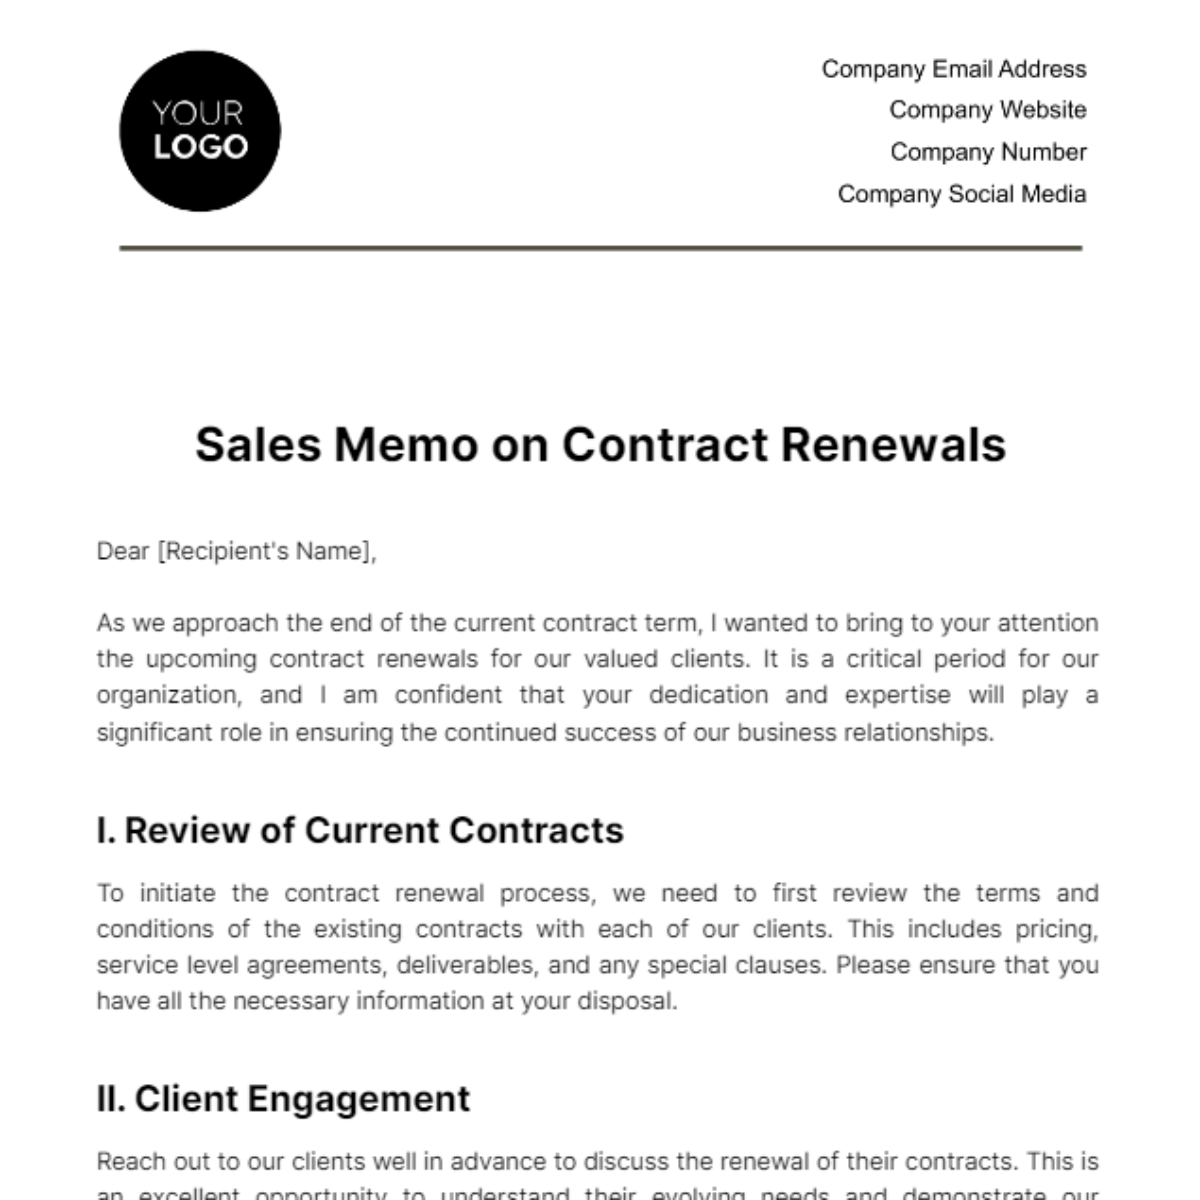 Free Sales Memo on Contract Renewals Template